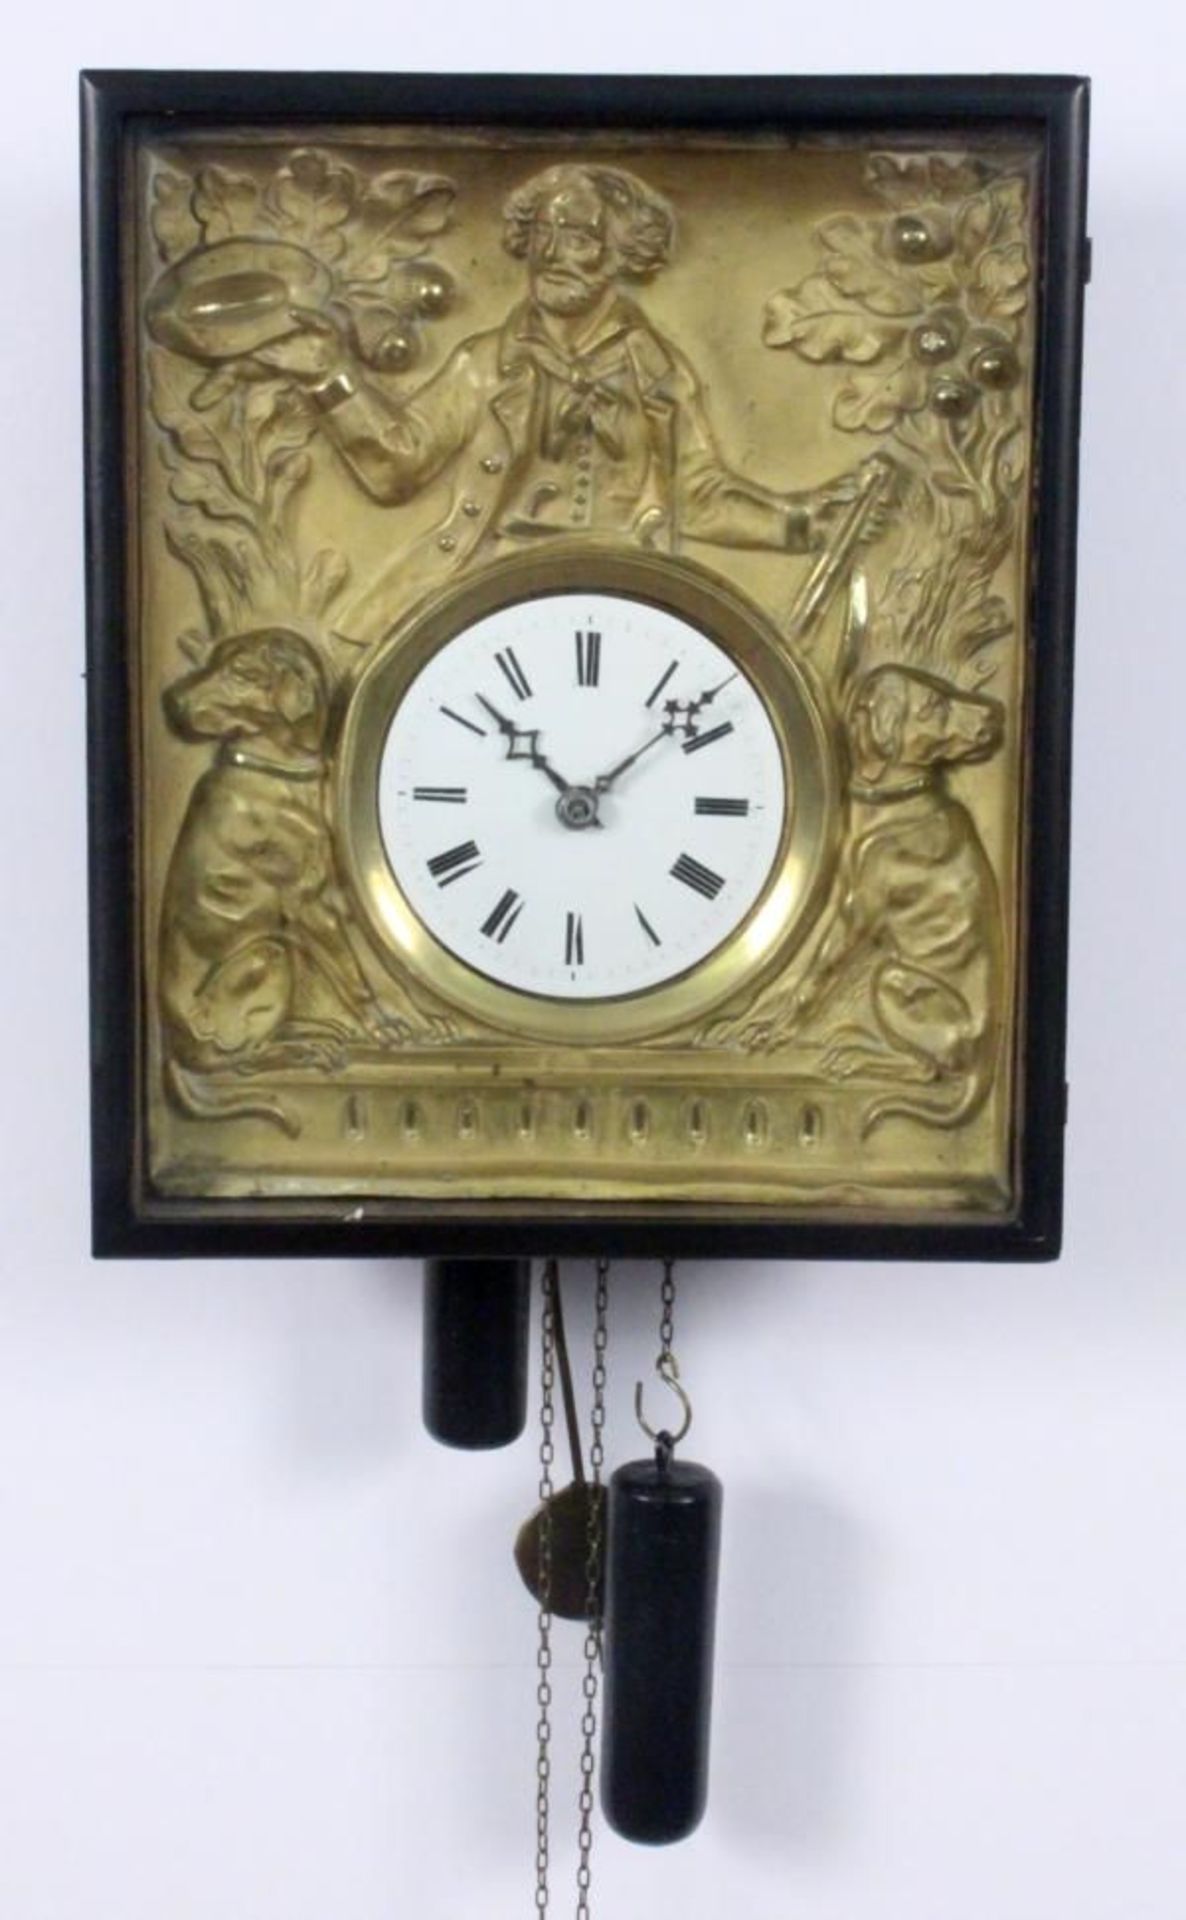 A BLACK FOREST WALL CLOCK 19th century Wooden case with glass front, gilded brass plate with